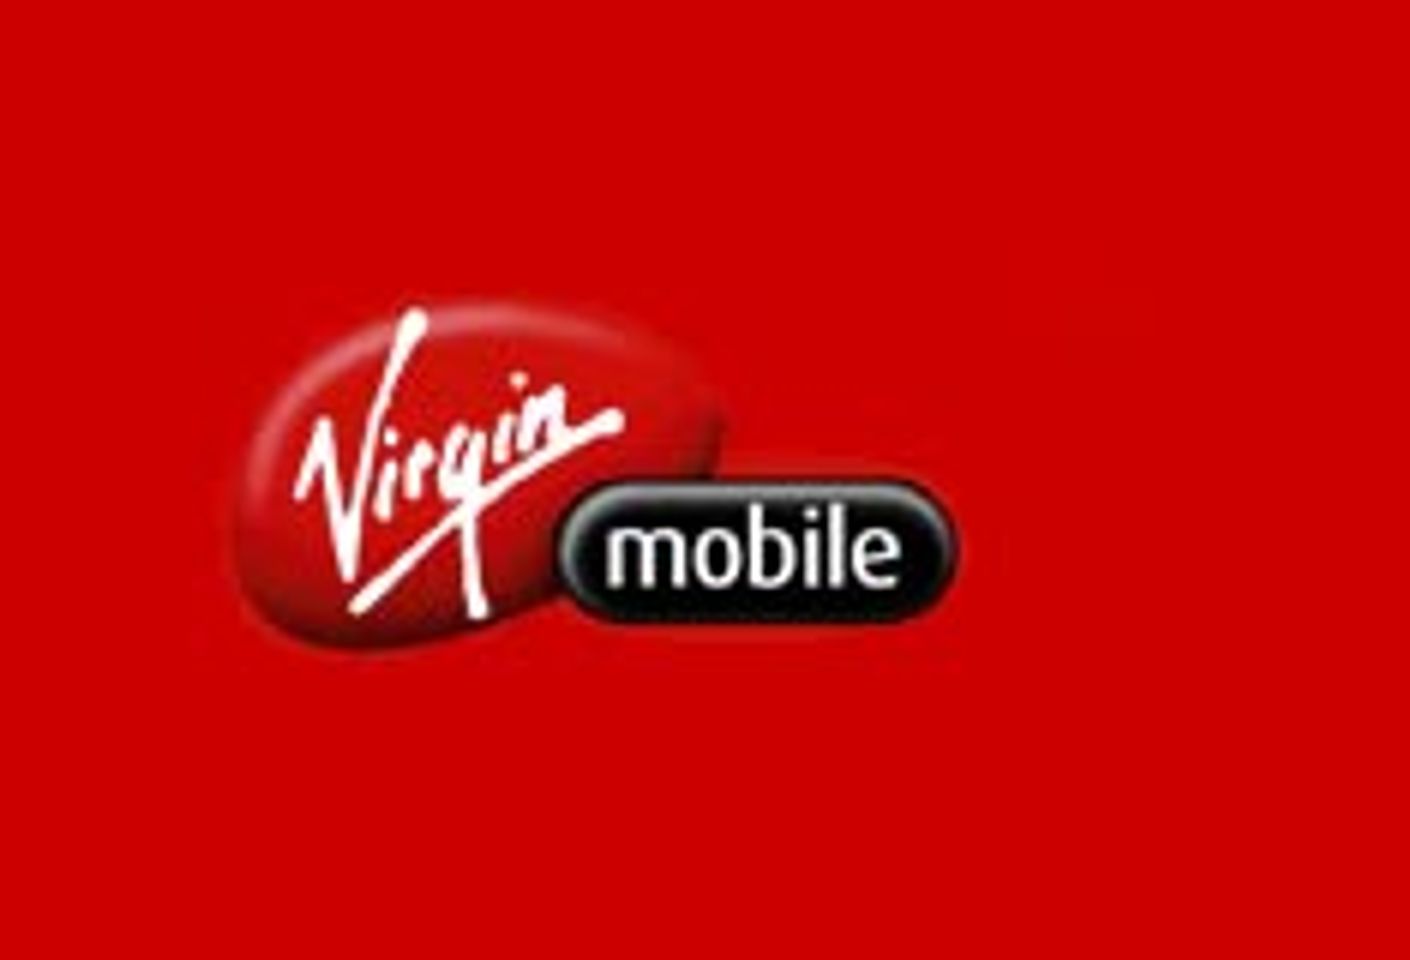 Virgin Mobile Announces Adult Content Policy